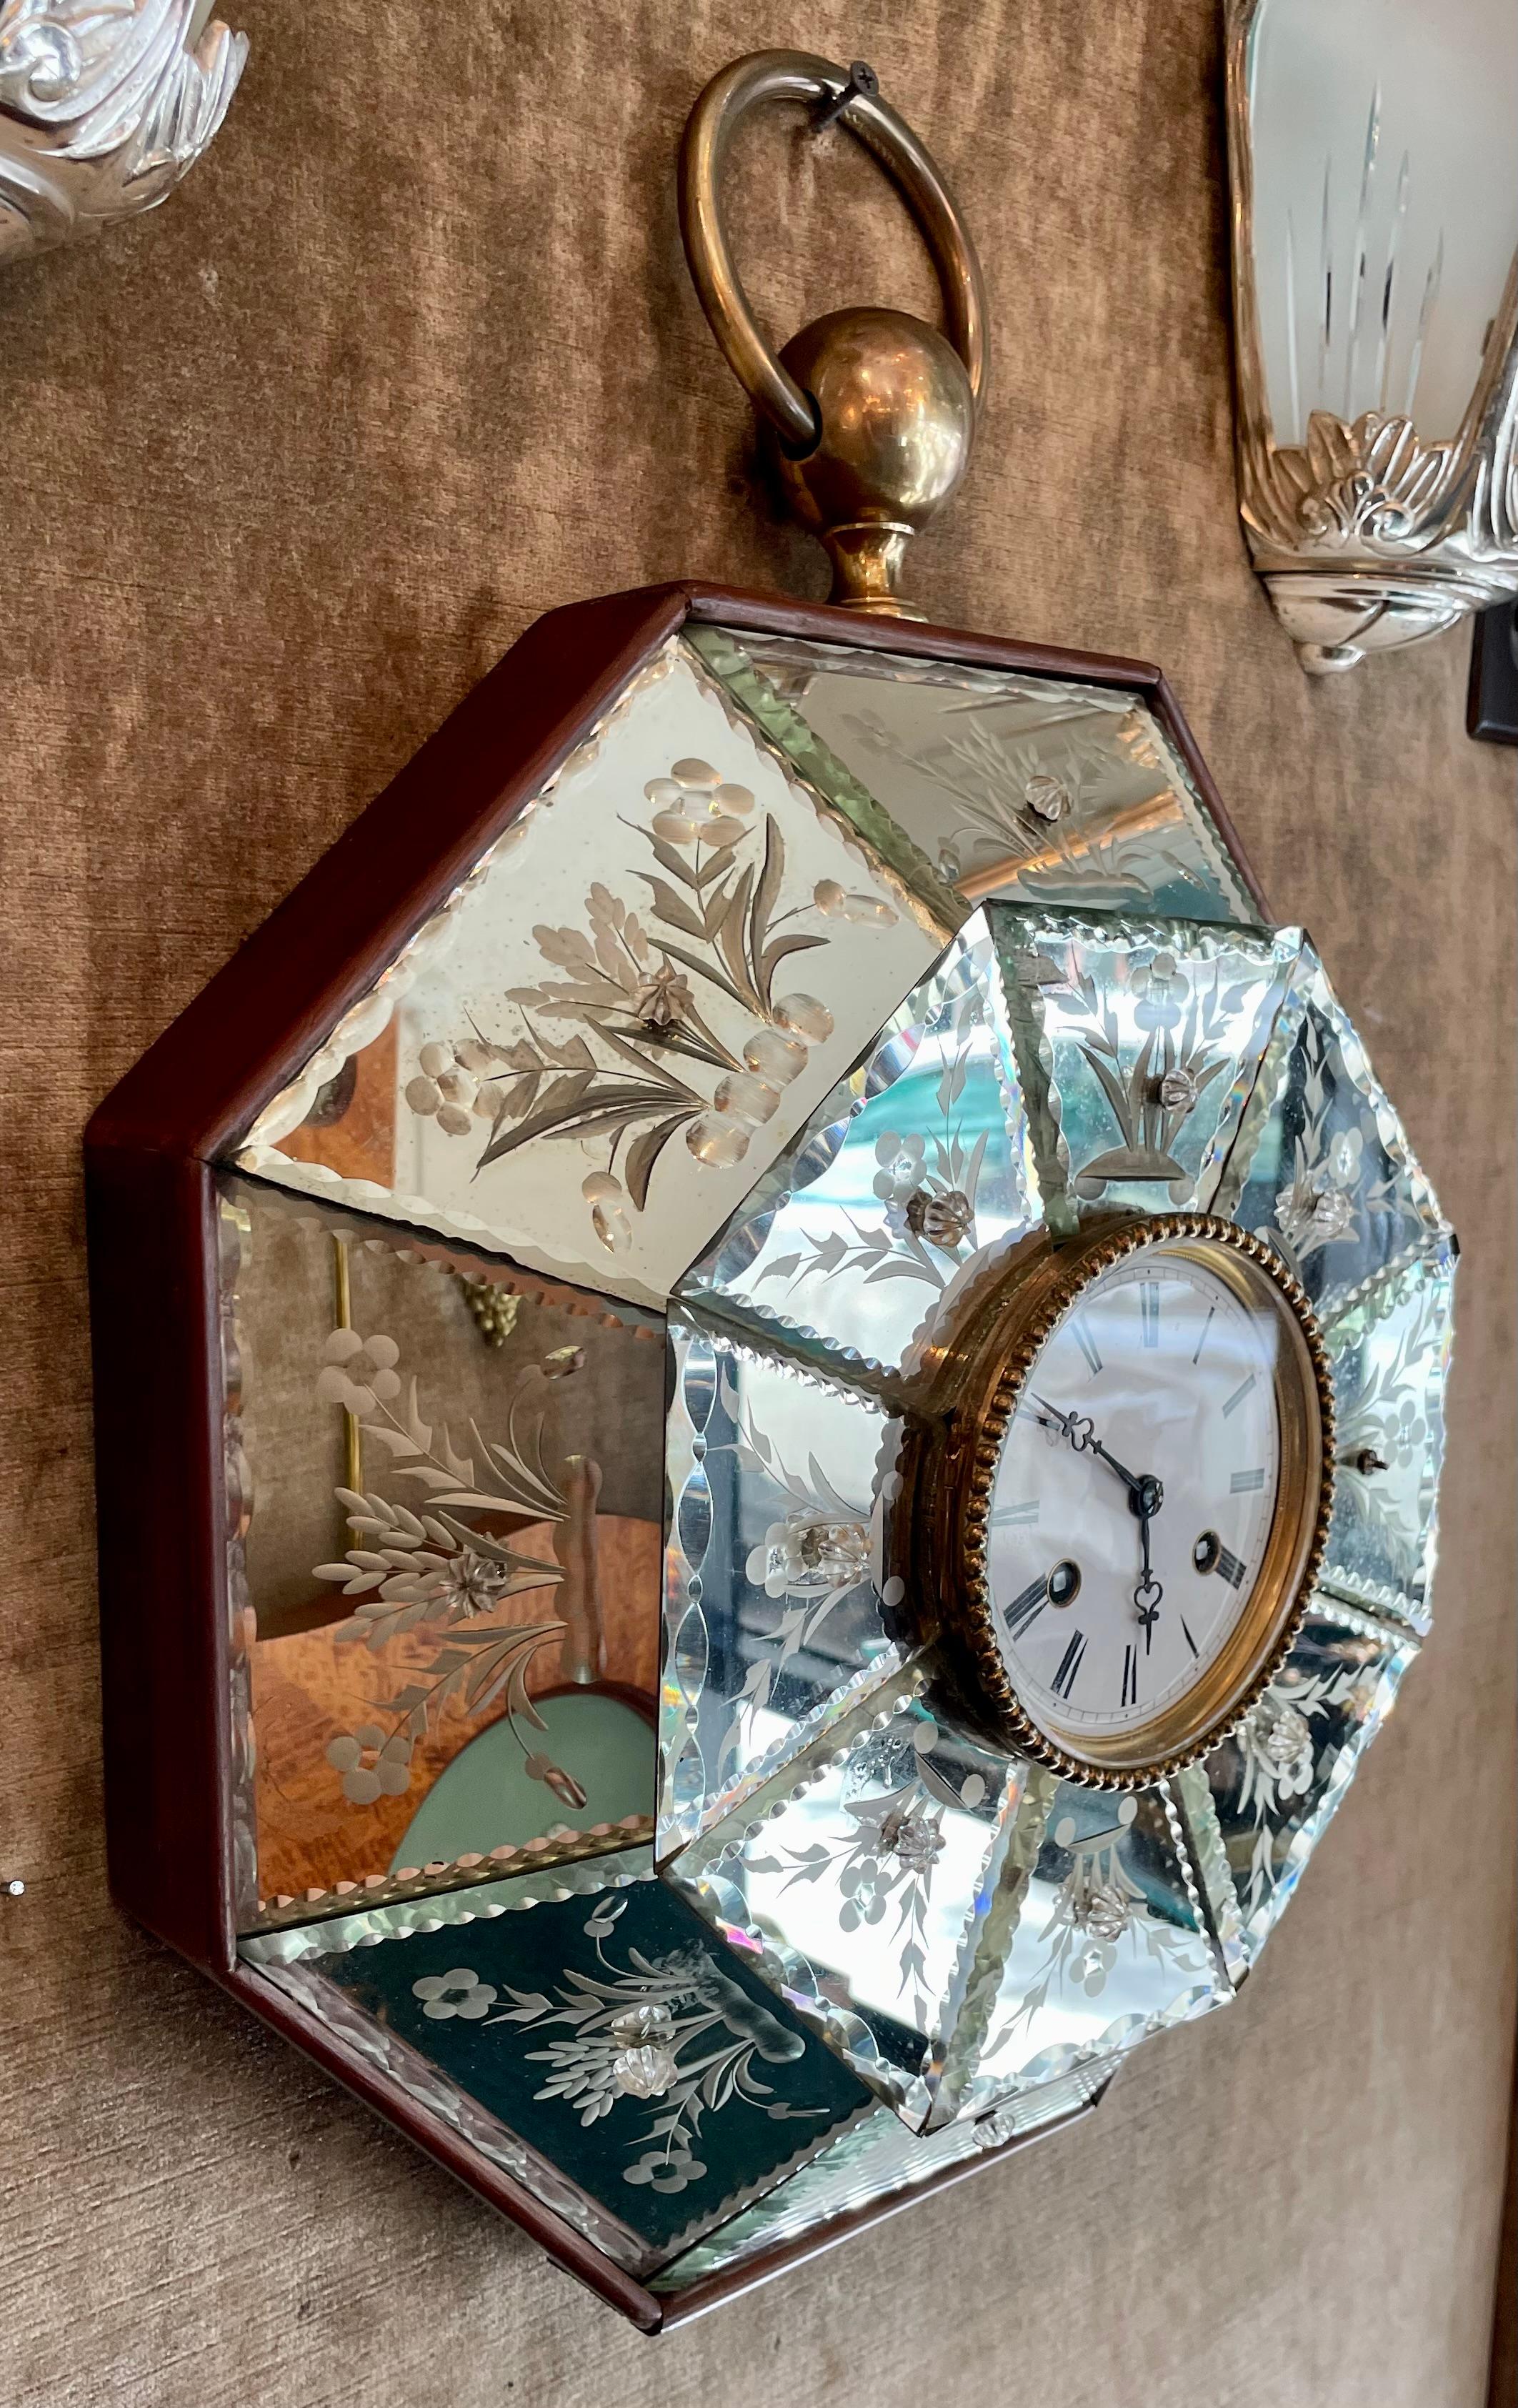 Antique mirrored & diamond-etched wall clock.